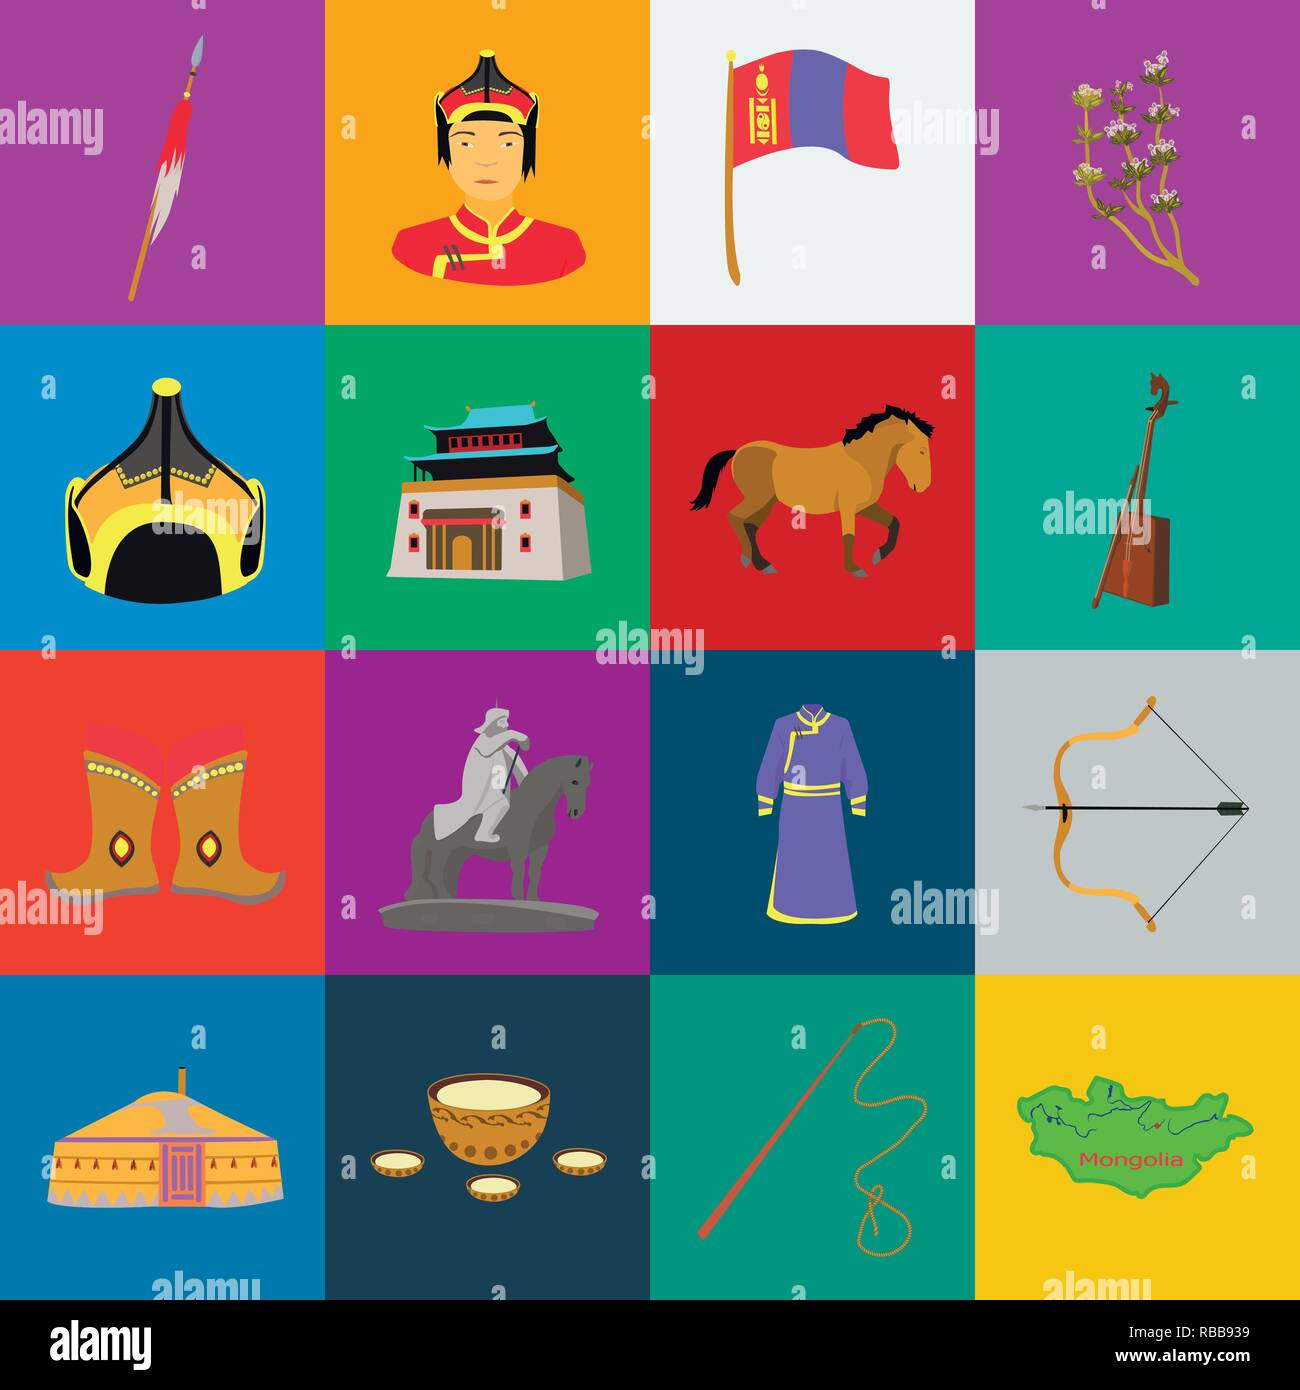 arms,arrow,belt,bow,buddhism,building,cartoon,cashmere,coat,collection,country,culture,flag,flower,fur,genghis,gutuly,headdress,horse,hudak,icon,illustration,instrument,khan,kialis,kumis,landmark,leather,map,monastery,mongol,mongolia,monument,musical,nature,religion,robe,set,shoes,sign,spear,temple,territory,tradition,travel,vector,whip,wool,yurt Vector Vectors , Stock Vector